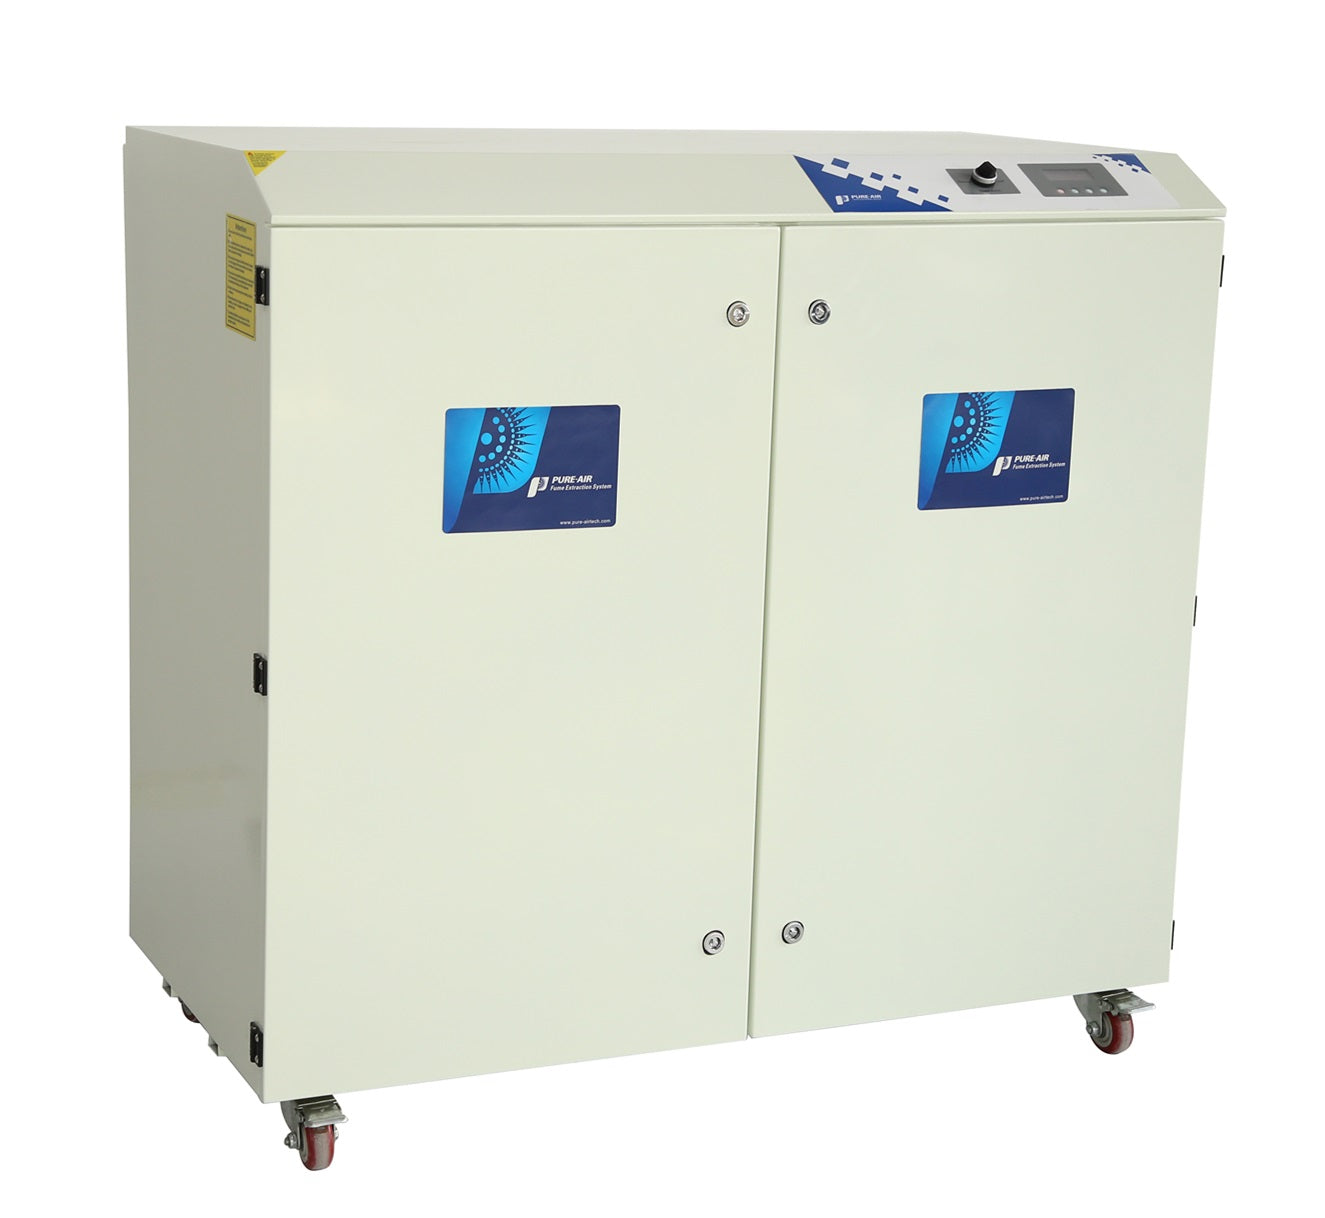 Fume Extraction Units for Co2 Laser Cutters - Cutting Plastics and Fabrics